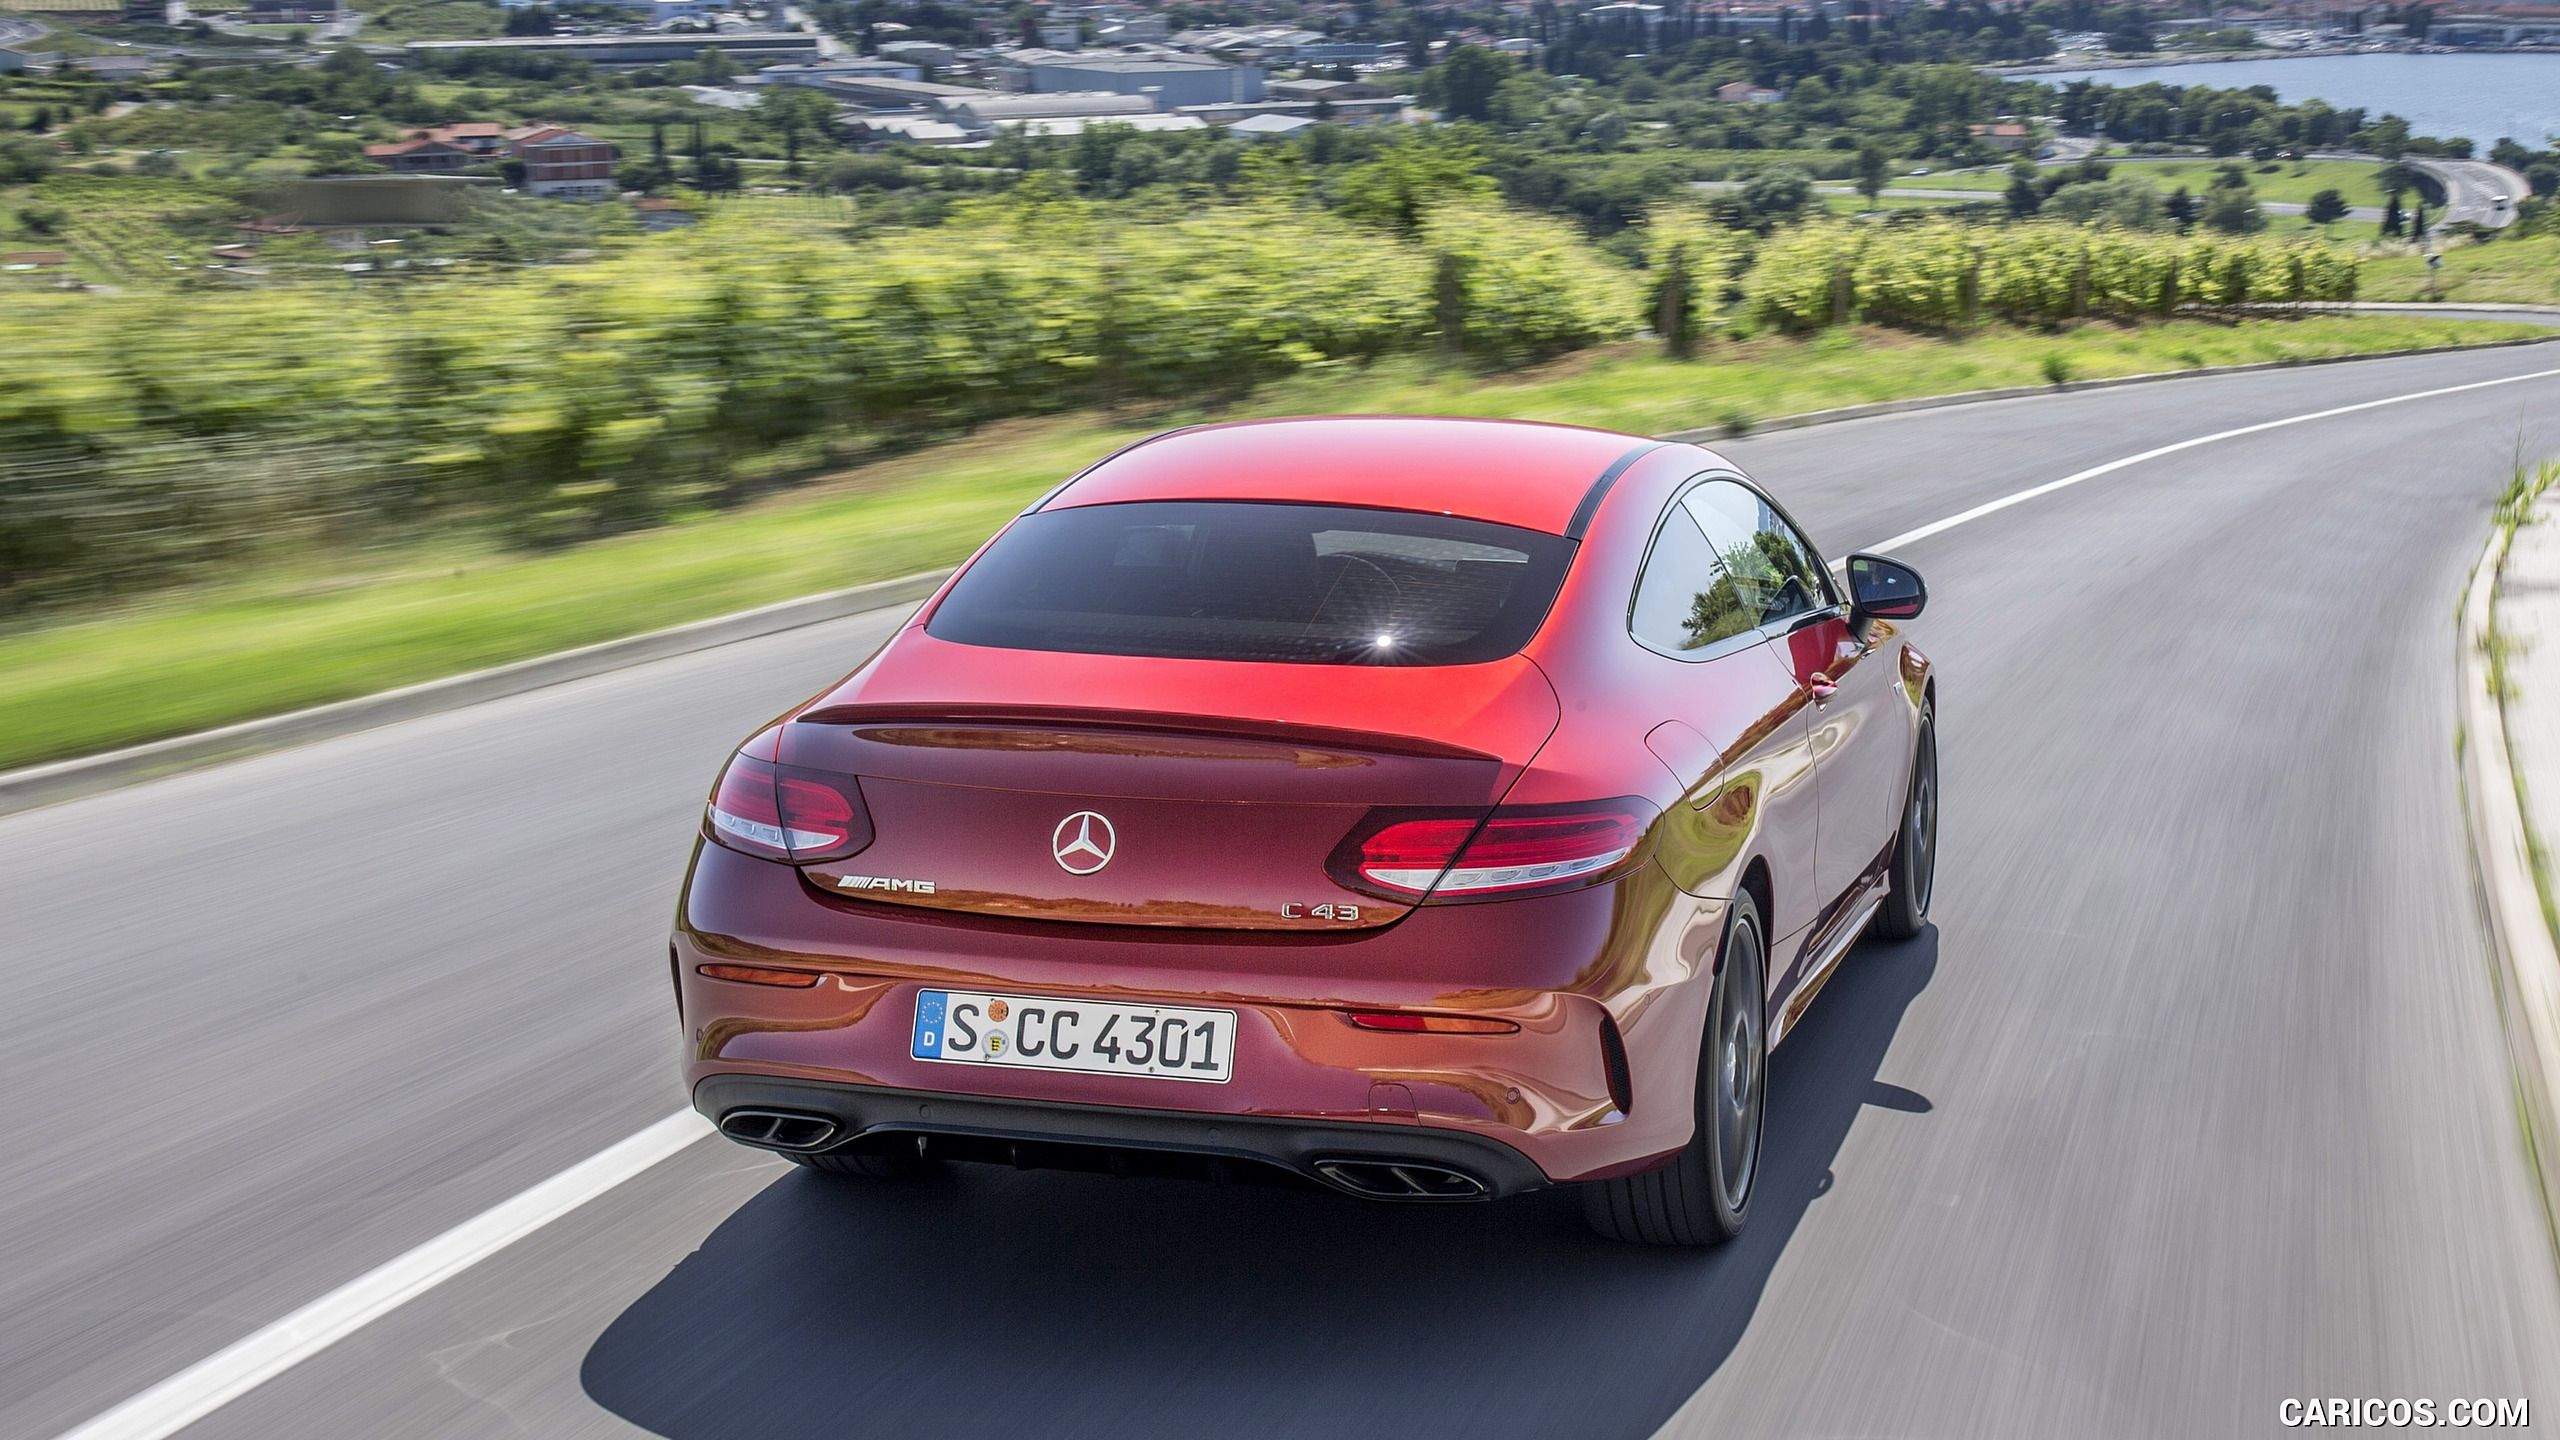 2017 Mercedes-AMG C43 4MATIC Coupé - Rear, #16 of 30